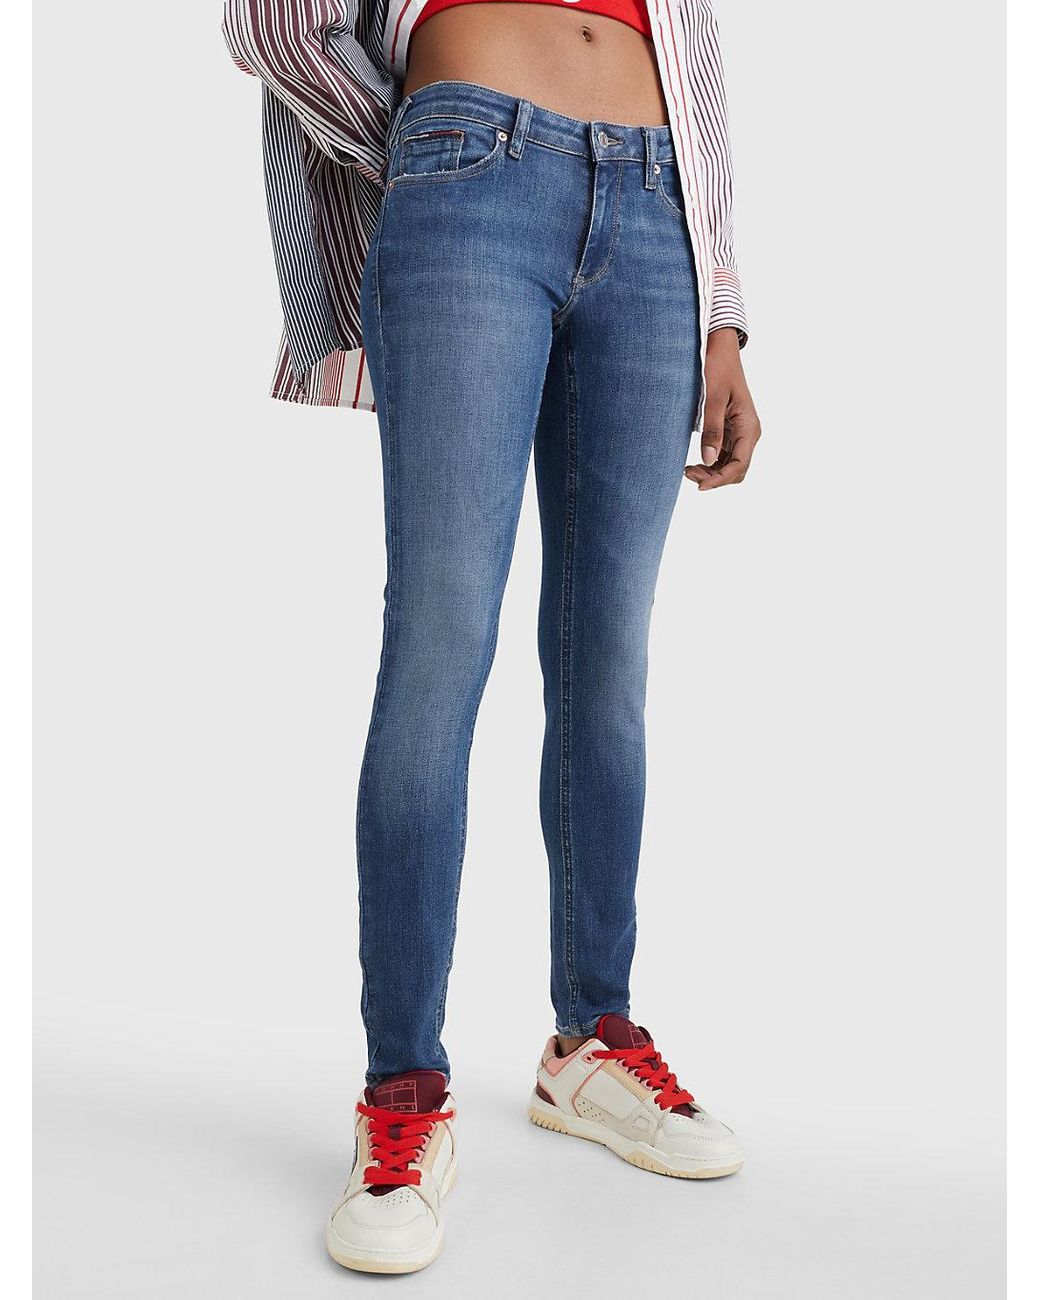 Tommy Hilfiger Sophie Low Rise Skinny Faded Jeans in Blue | Lyst UK